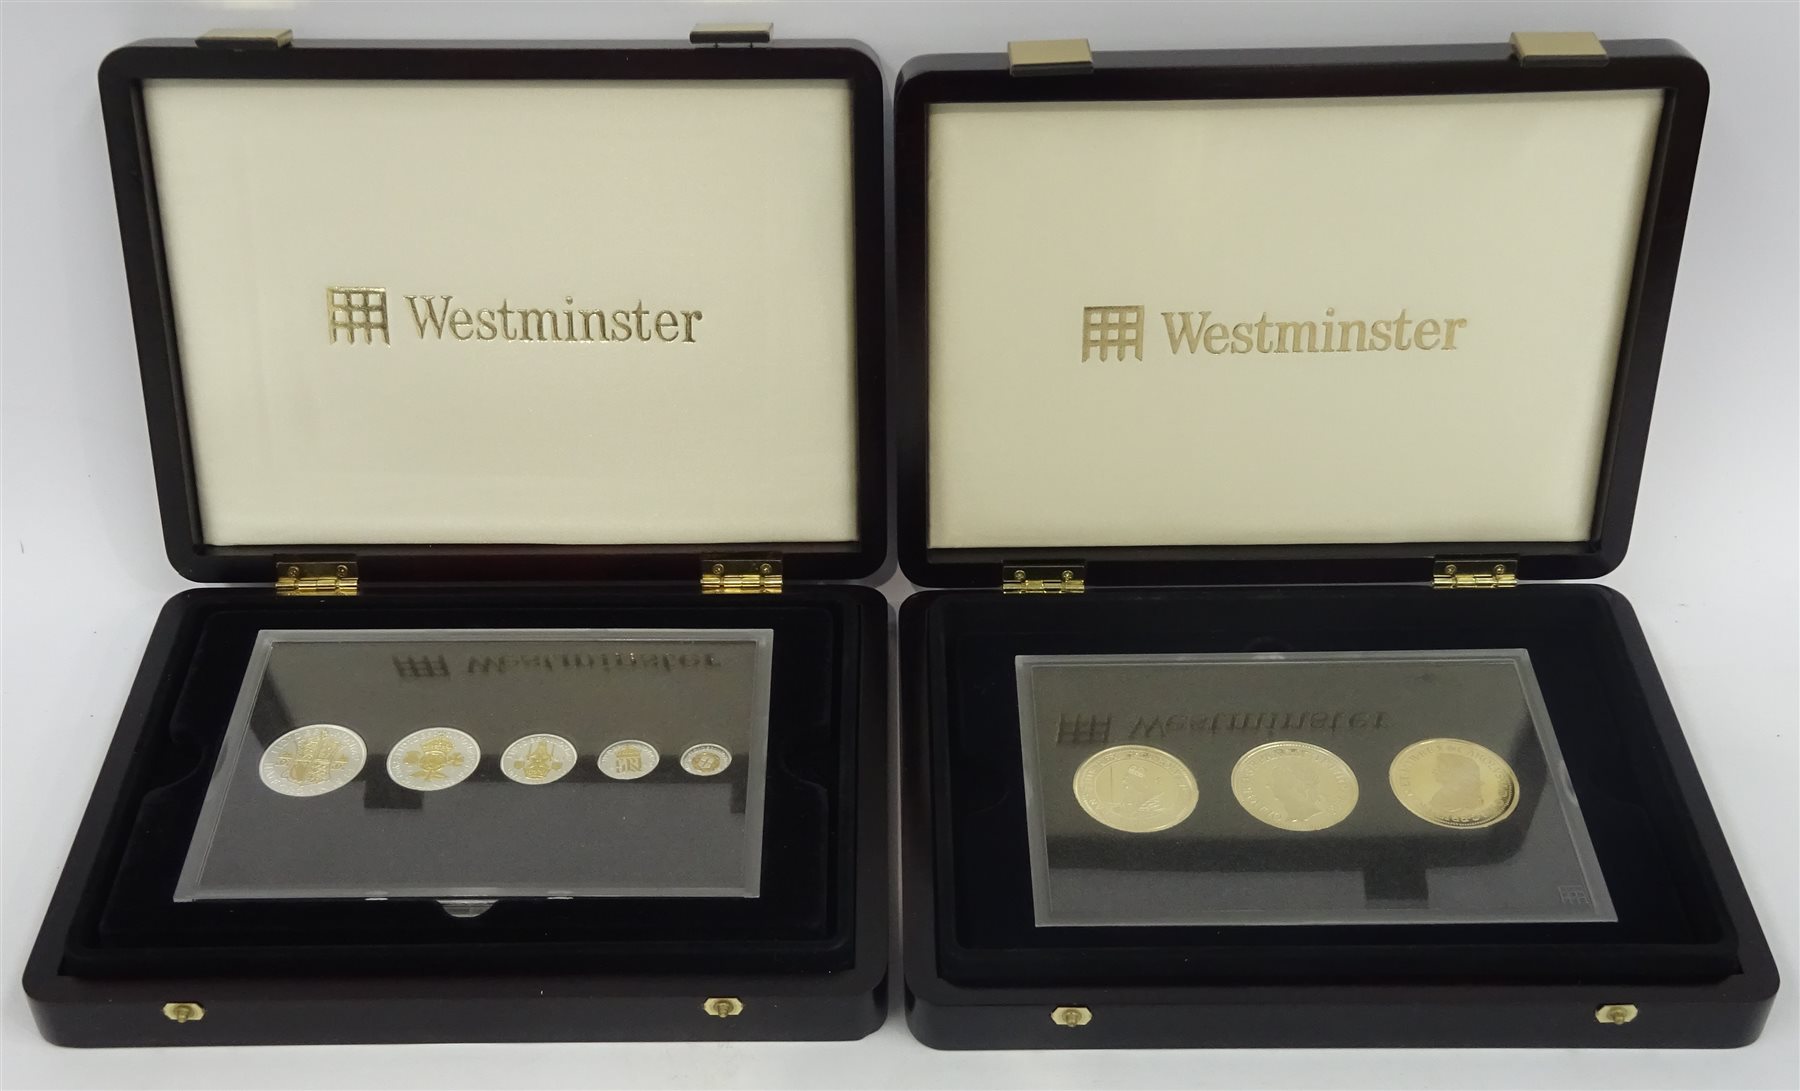 Westminster collection of five 50 silver coins of World War II, a